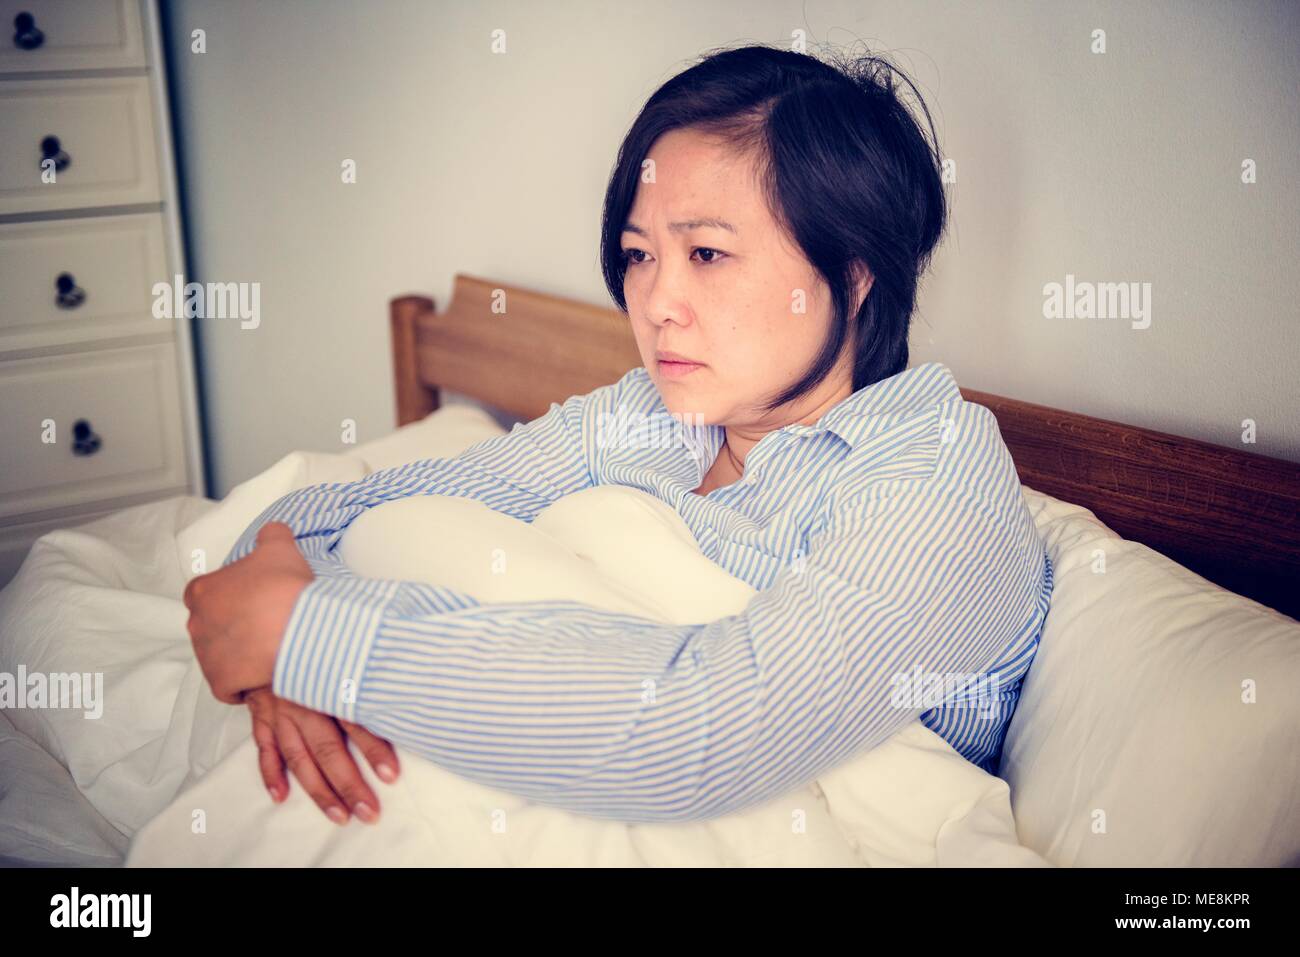 An upset woman pondering in bed Stock Photo